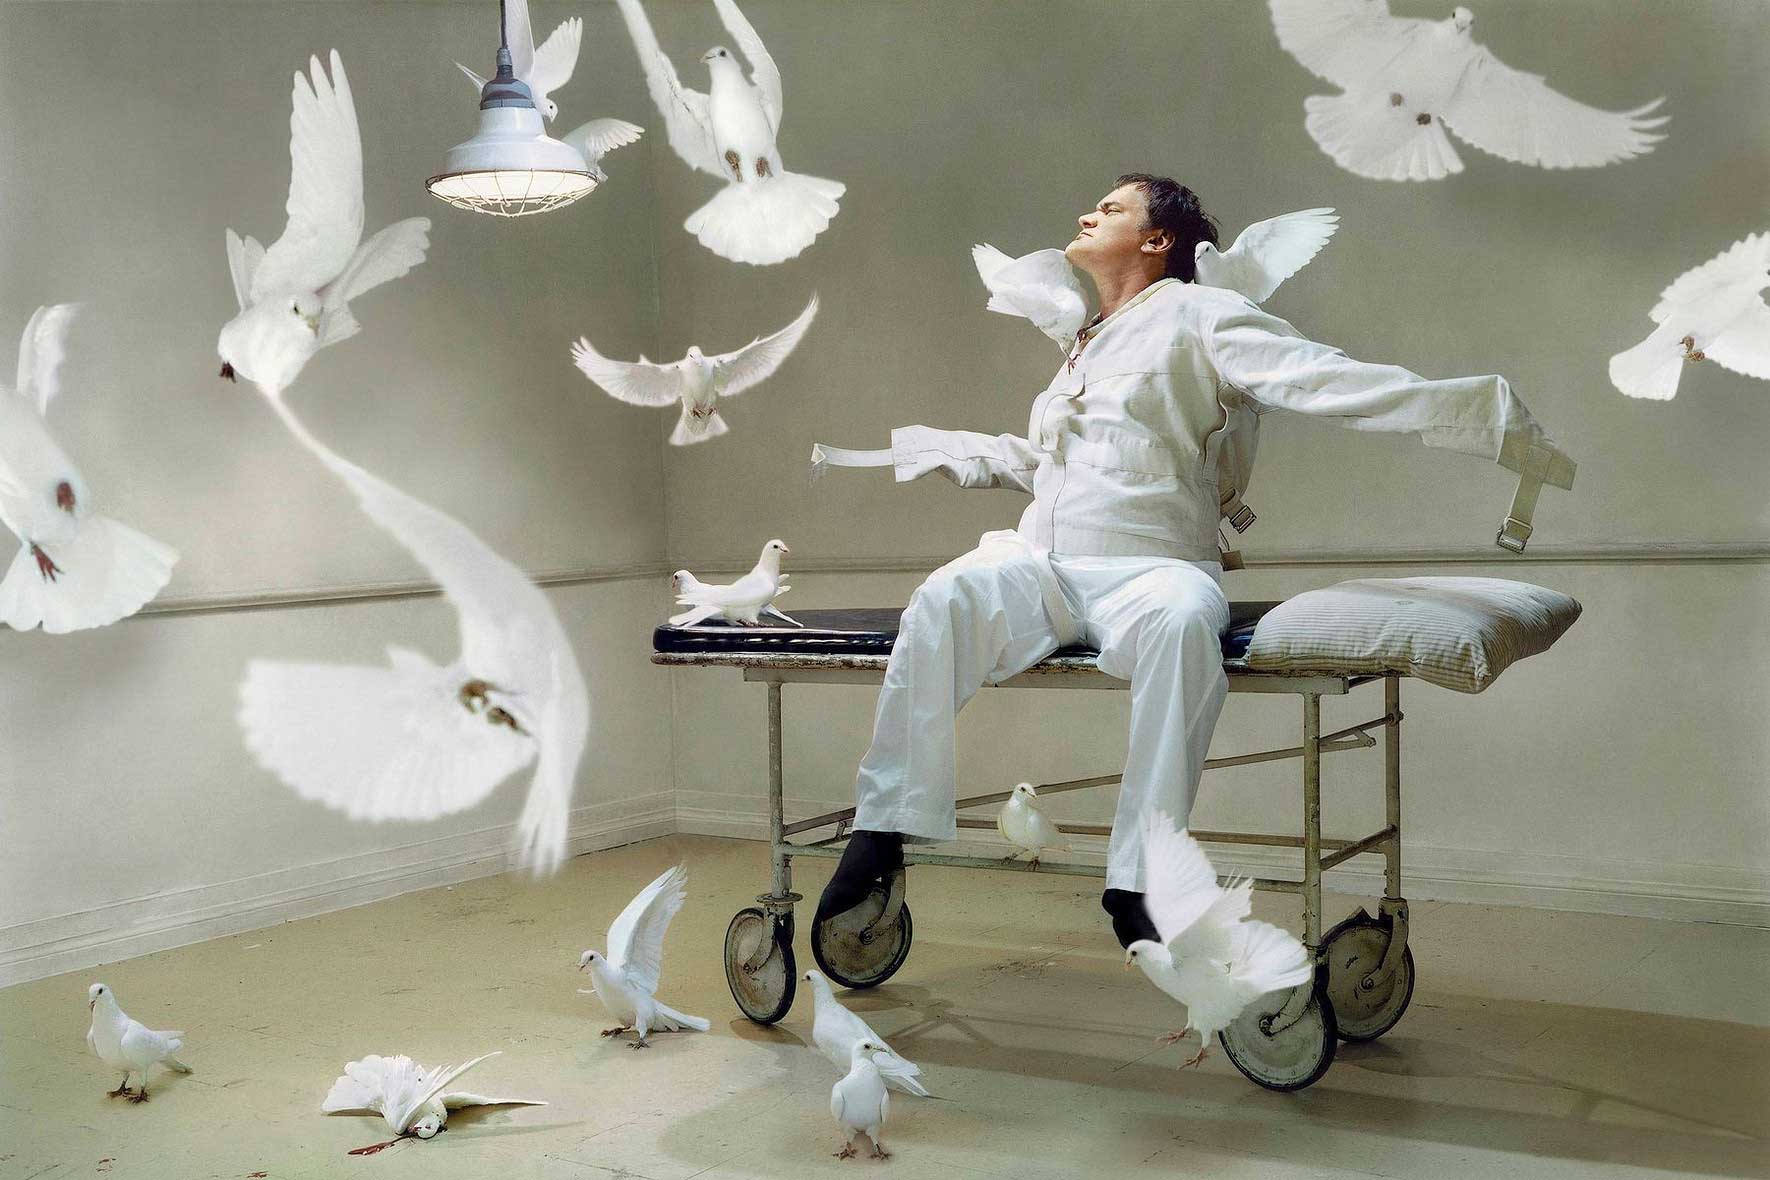 Quentin Tarantino."This was during the days of Kill Bill. I thought of a shoot with white doves. Sort of him being the victim of these white doves -- a [symbolic] mixture of One Flew Over the Cuckoos Nest, and the symbol of peace. We had the doves and the gurney and it took a while to talk him into it. There were dove wranglers and [the doves] would fly around and come back. Not all the doves are in this frame, though. There is one dead one which makes the whole thing slightly more sinister."